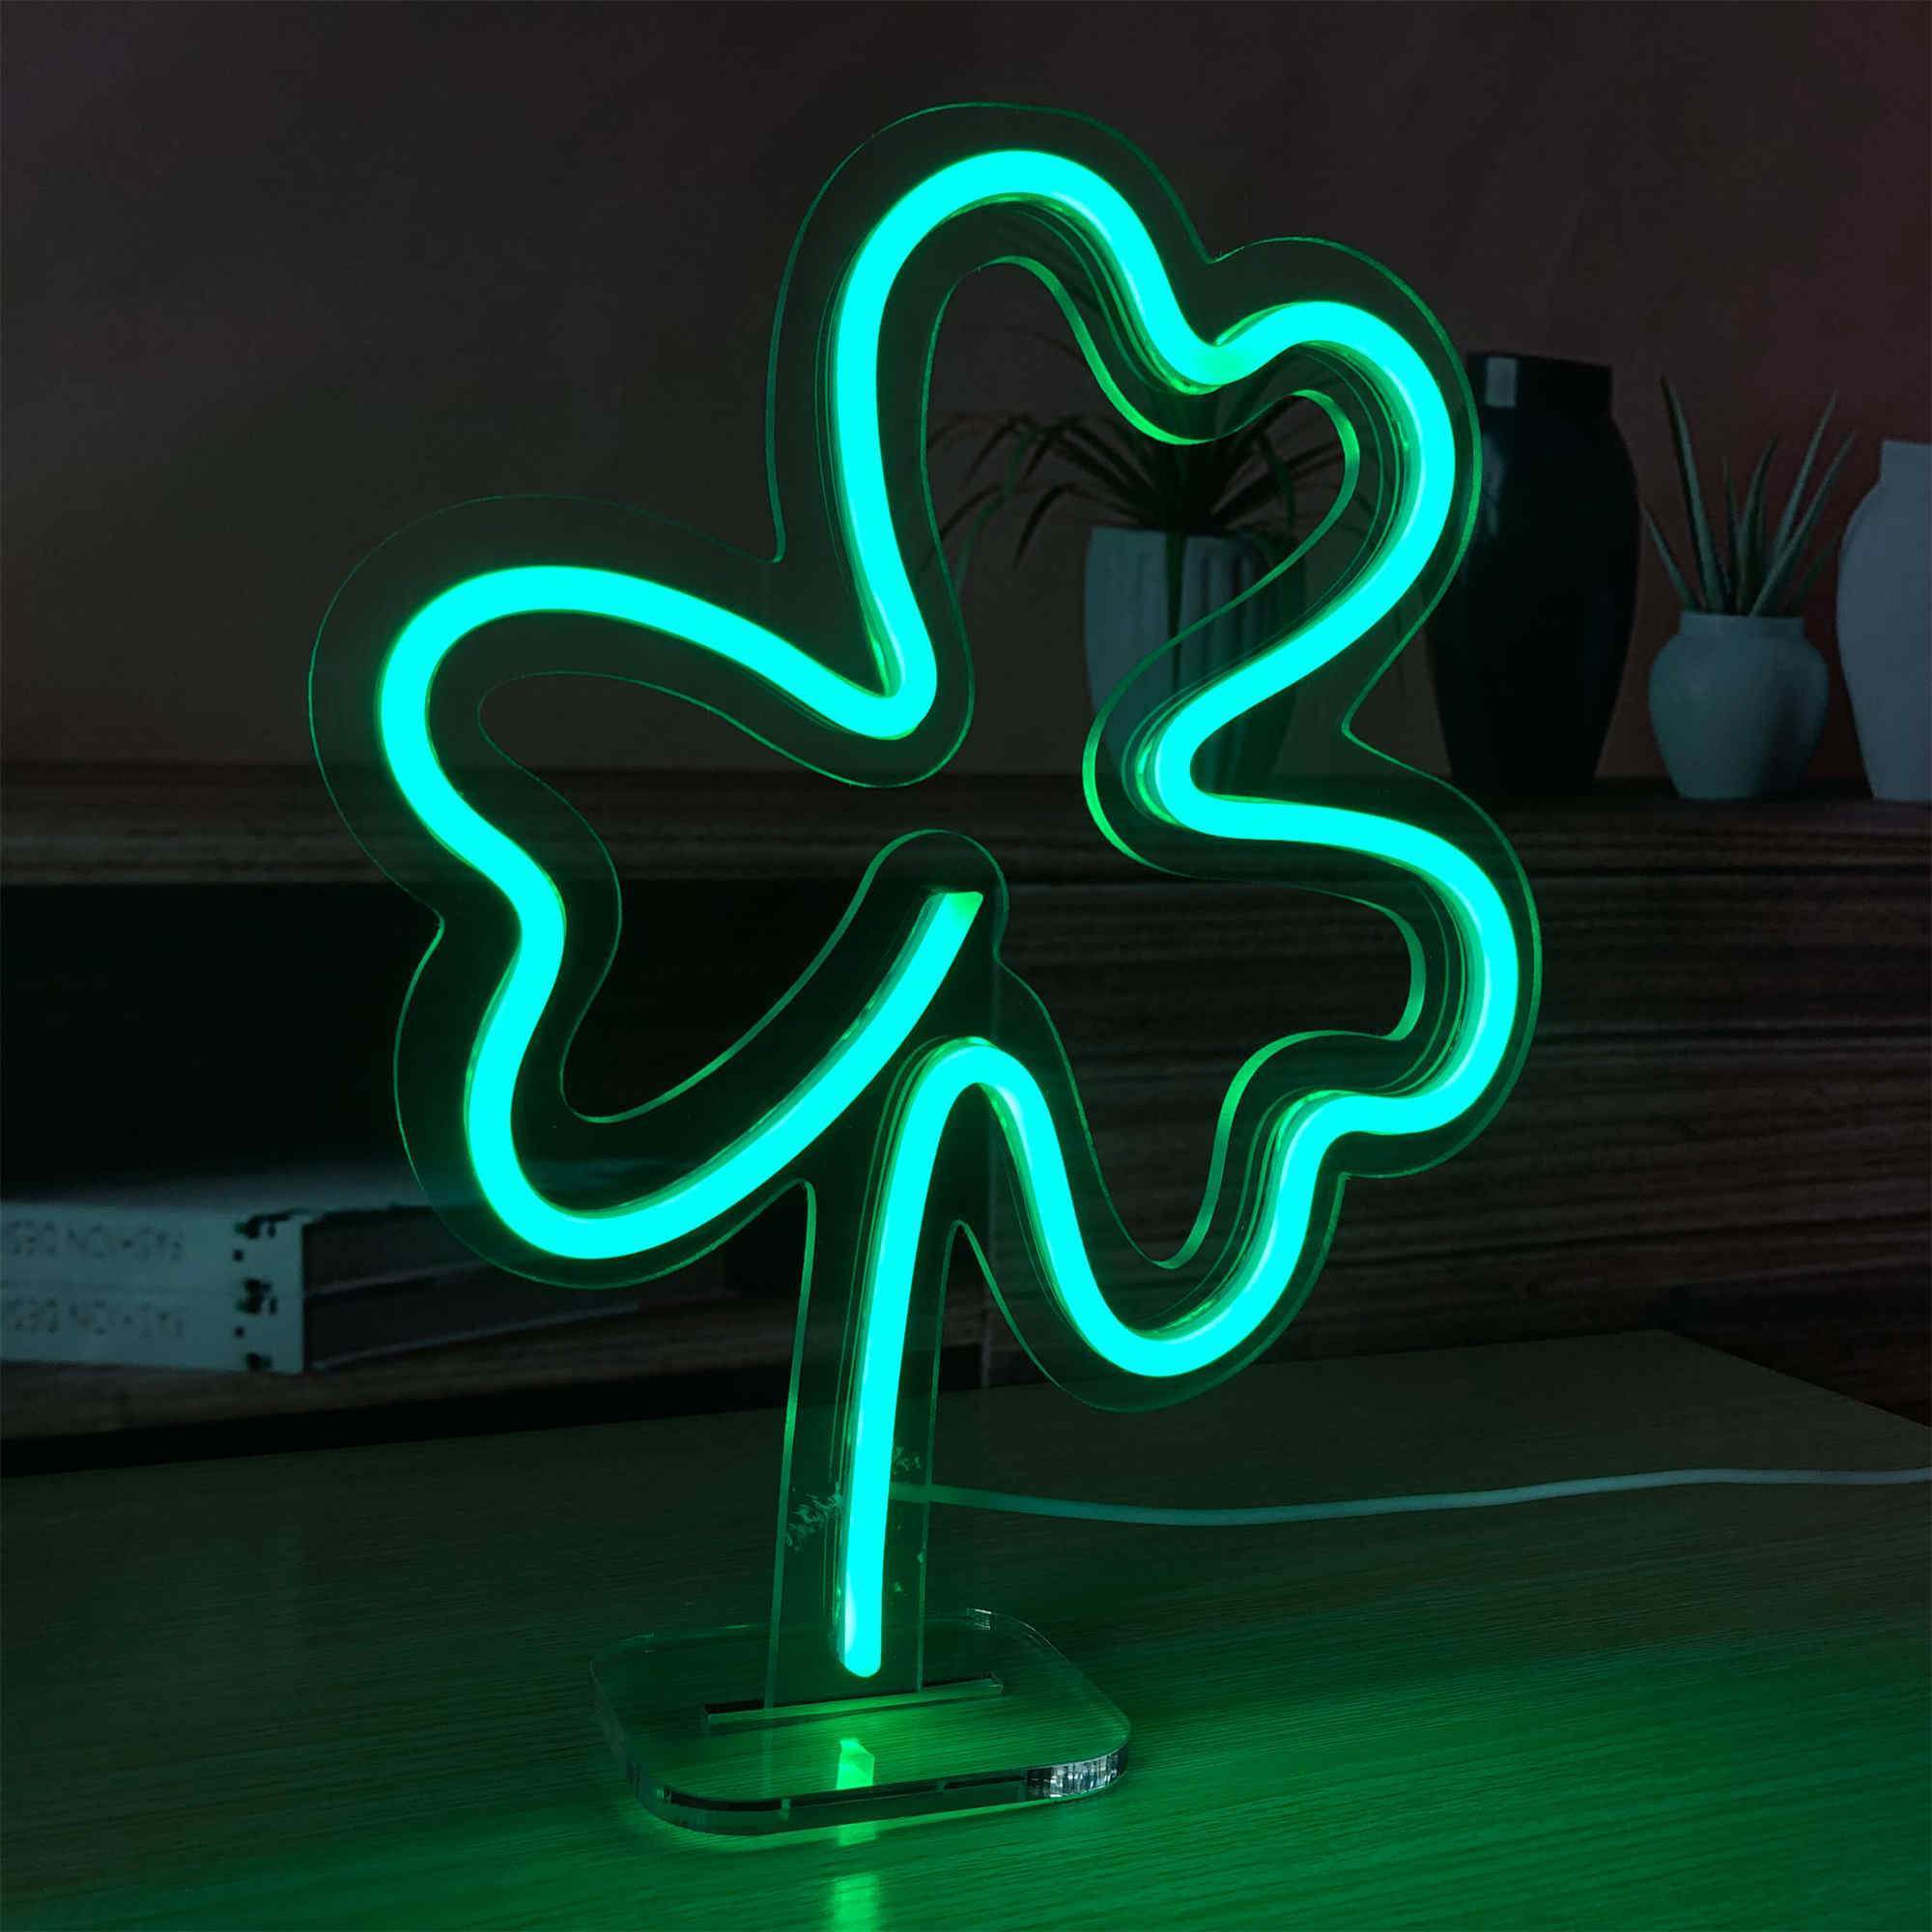 Clover Small LED Neon Sign lights